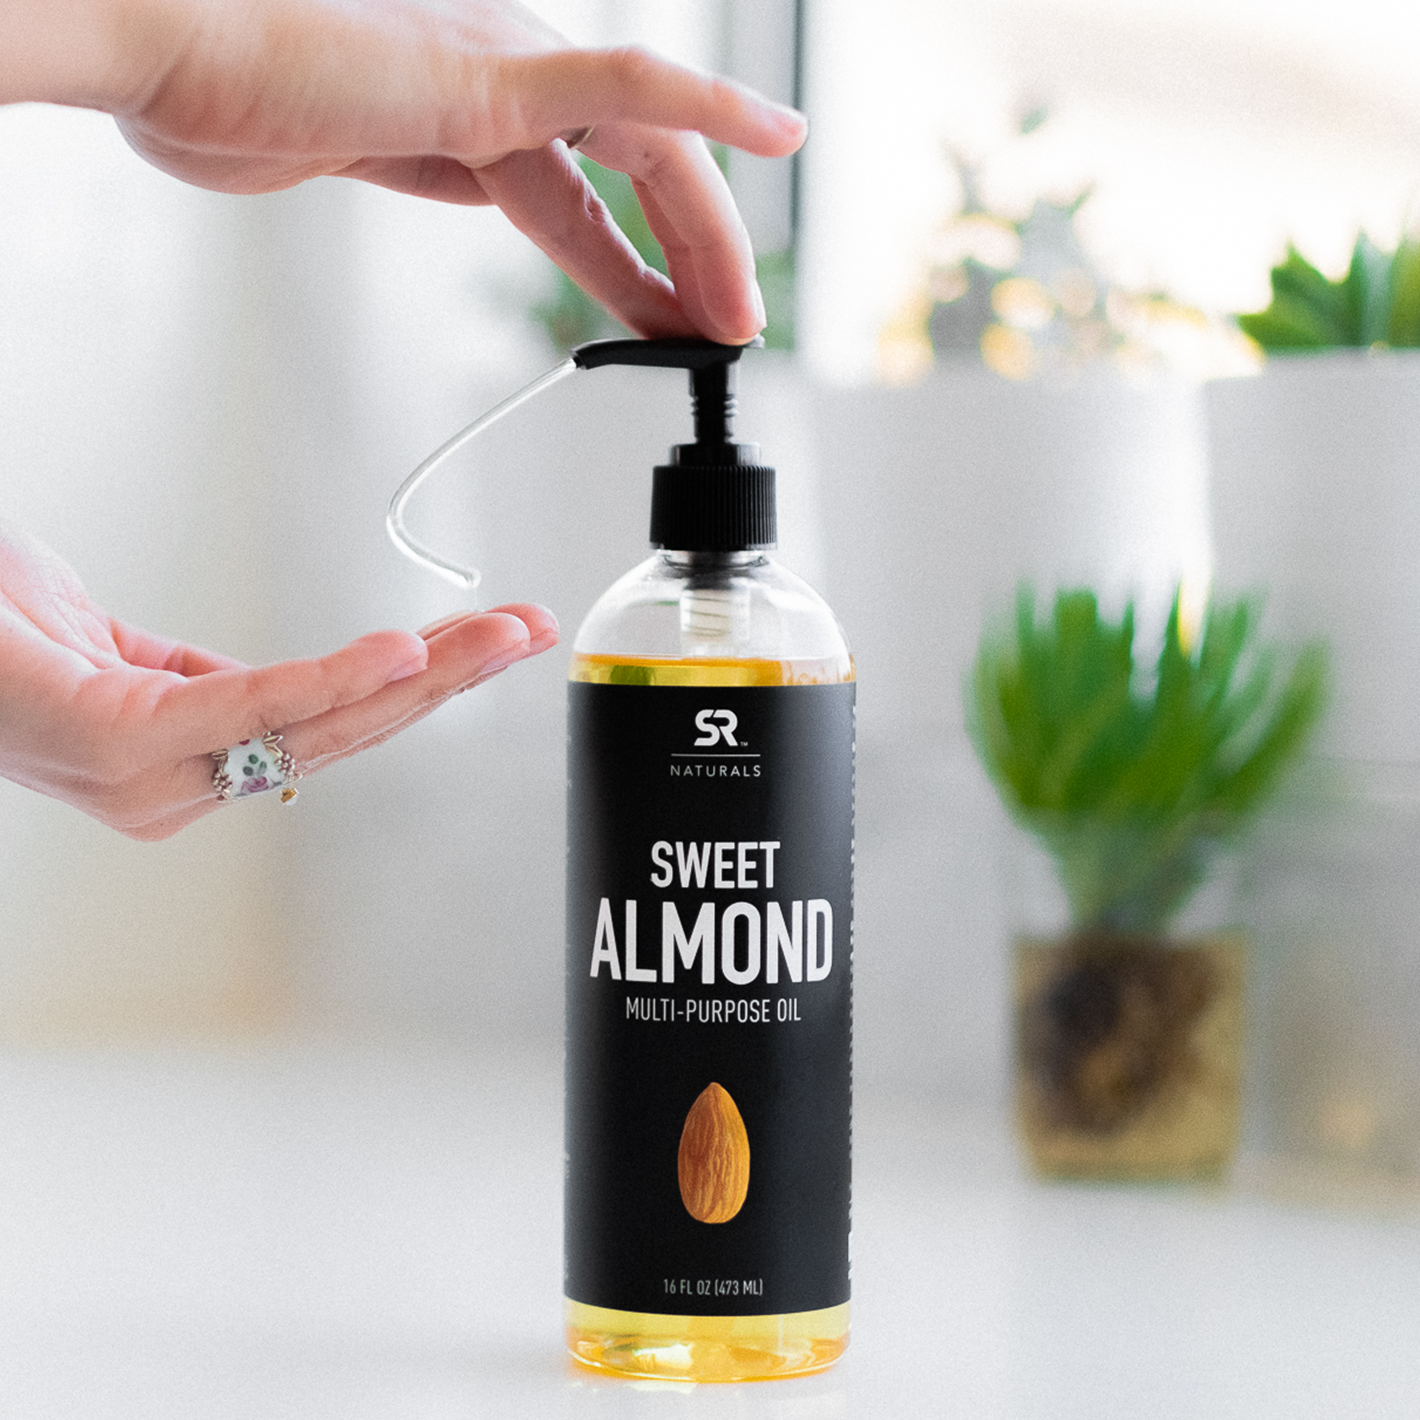 Woman pumping out Sports Research Naturals Sweet Almond Oil into her hand from the bottle.